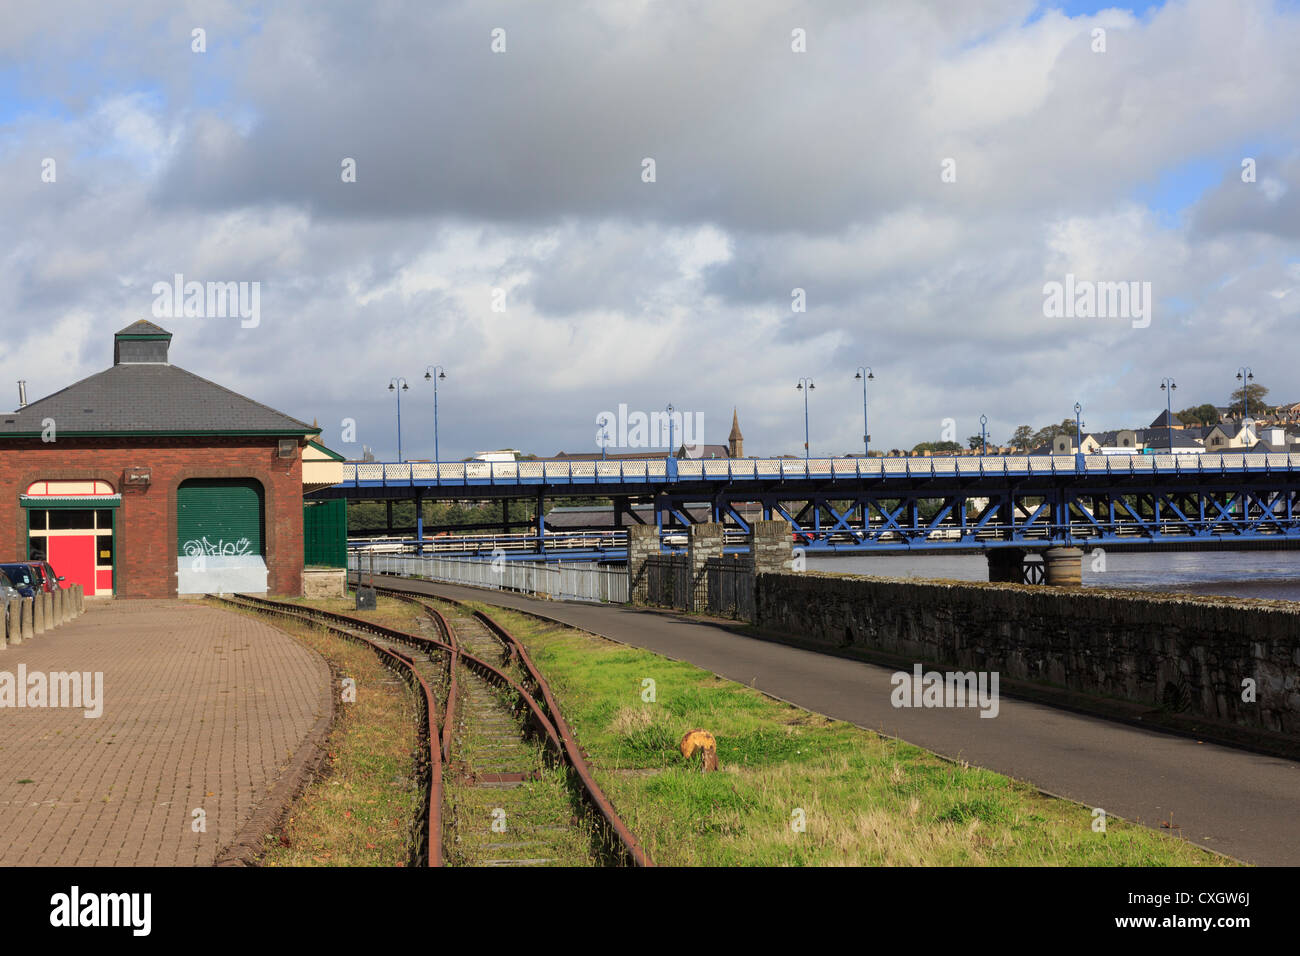 Railway museum by River Foyle and Craigavon bridge in Derry, Co Londonderry, Northern Ireland, UK Stock Photo